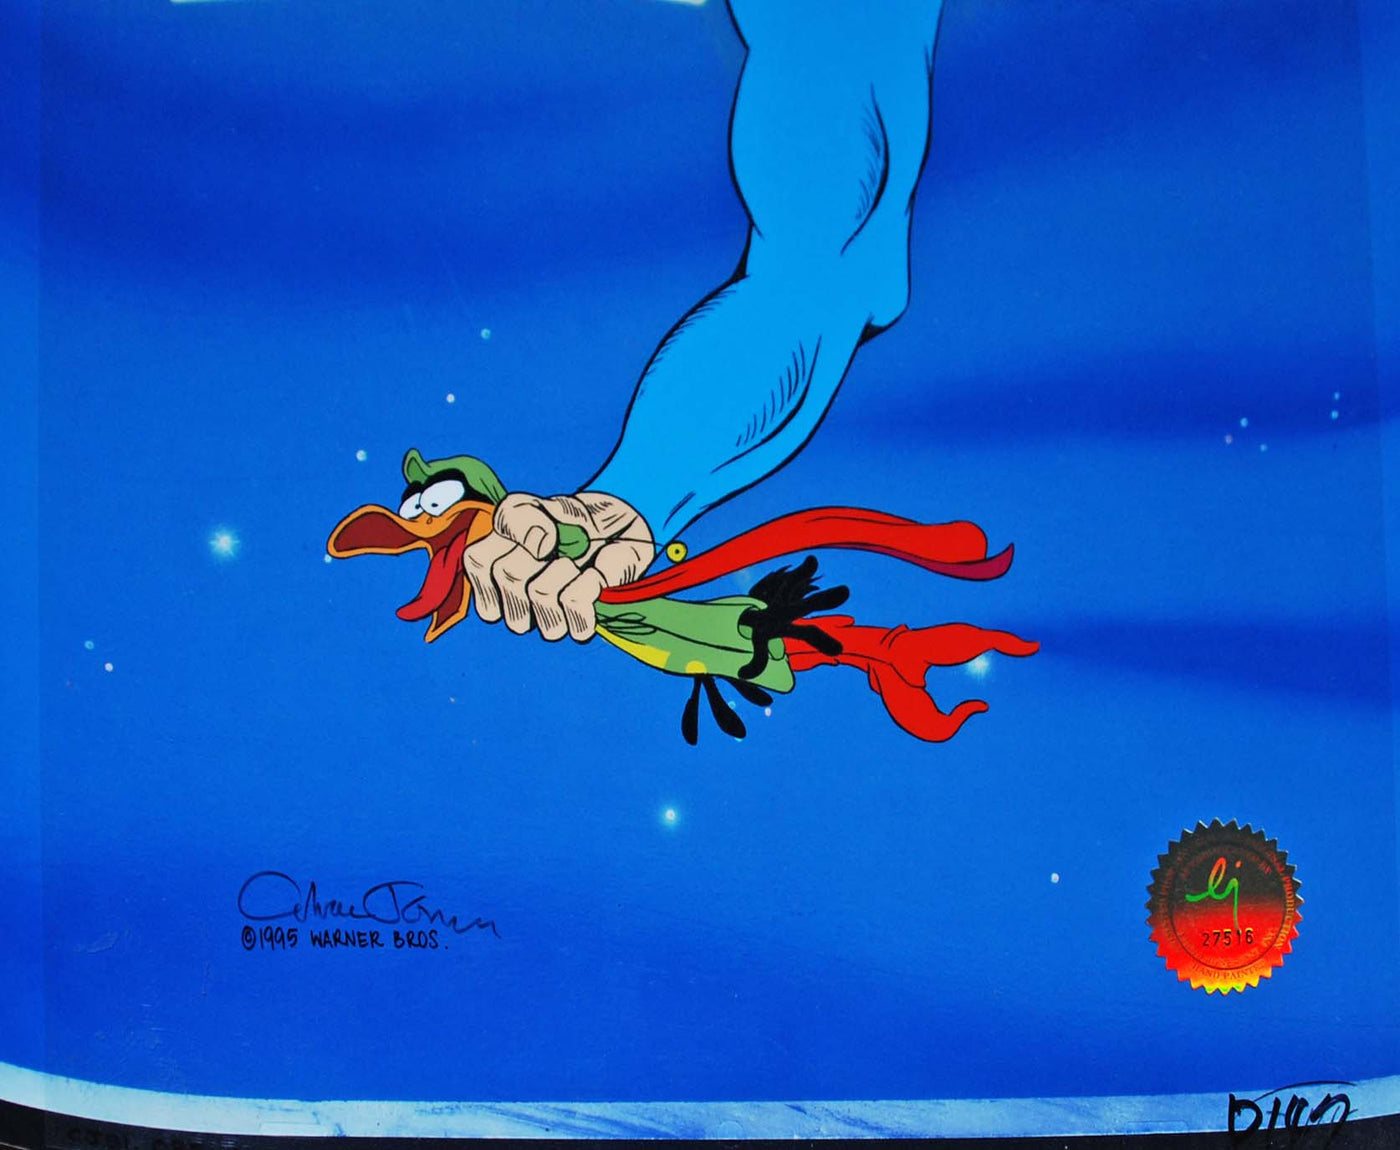 Original Warner Brothers Production Cel from Superior Duck